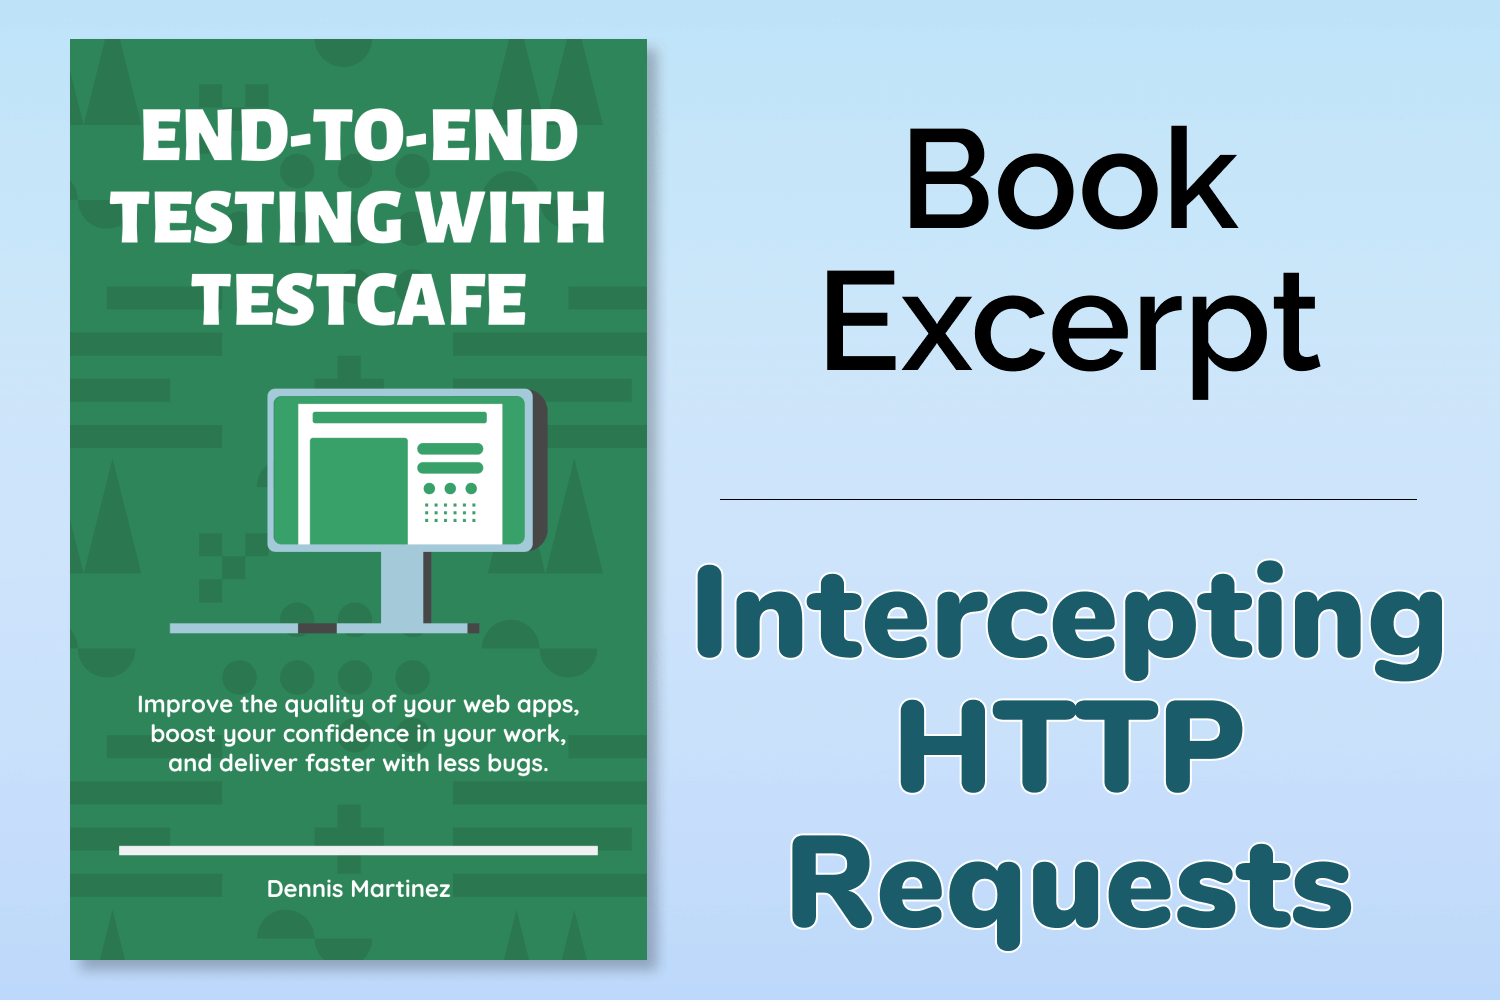 End-to-End Testing with TestCafe Book Excerpt: Intercepting HTTP Requests